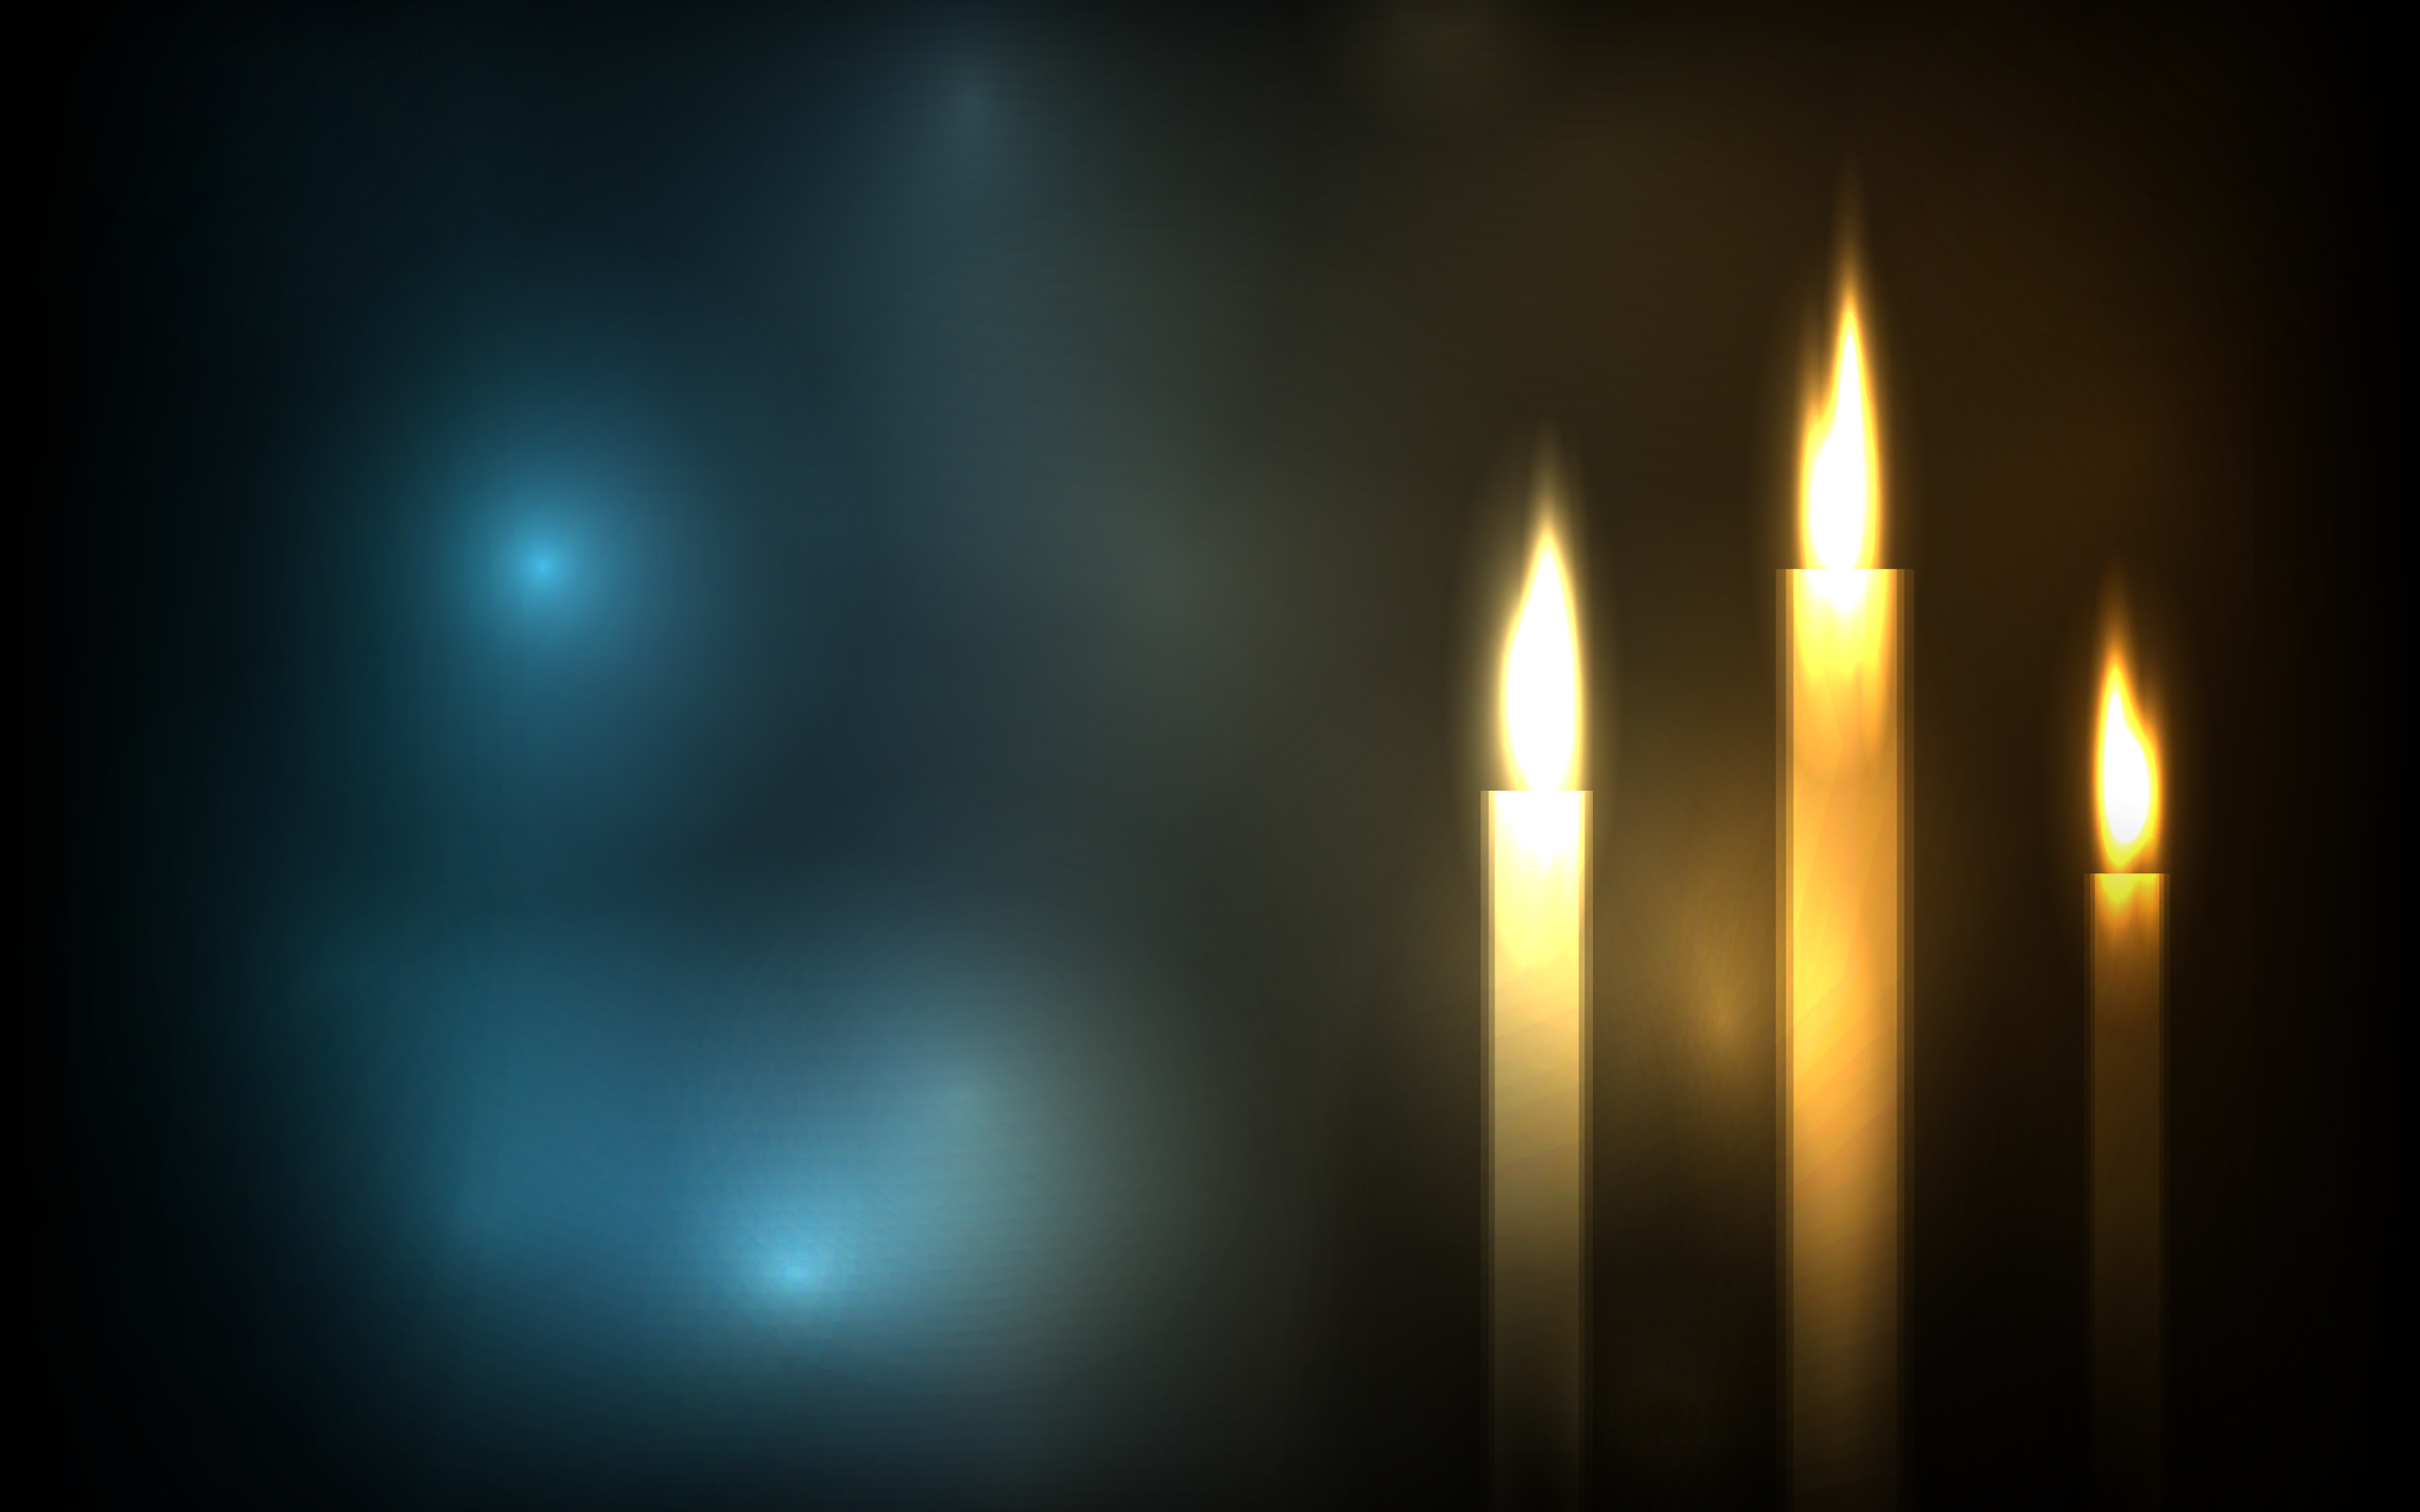 General 2560x1600 abstract candles digital art